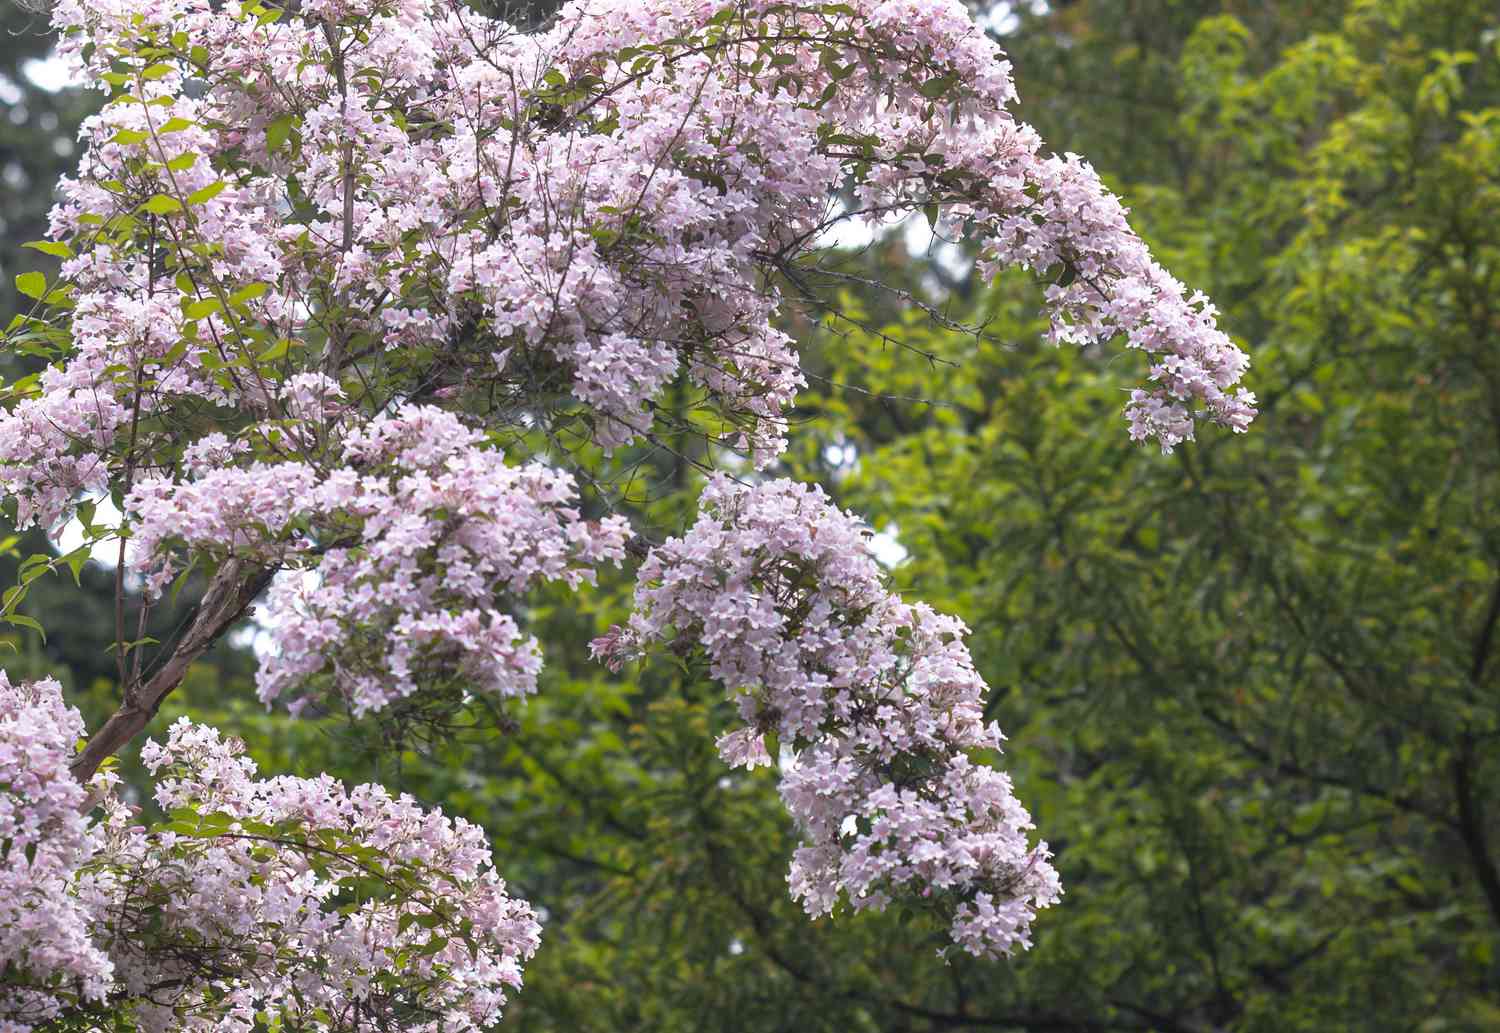 Beauty bush shrub with small pink blooms on arching branches